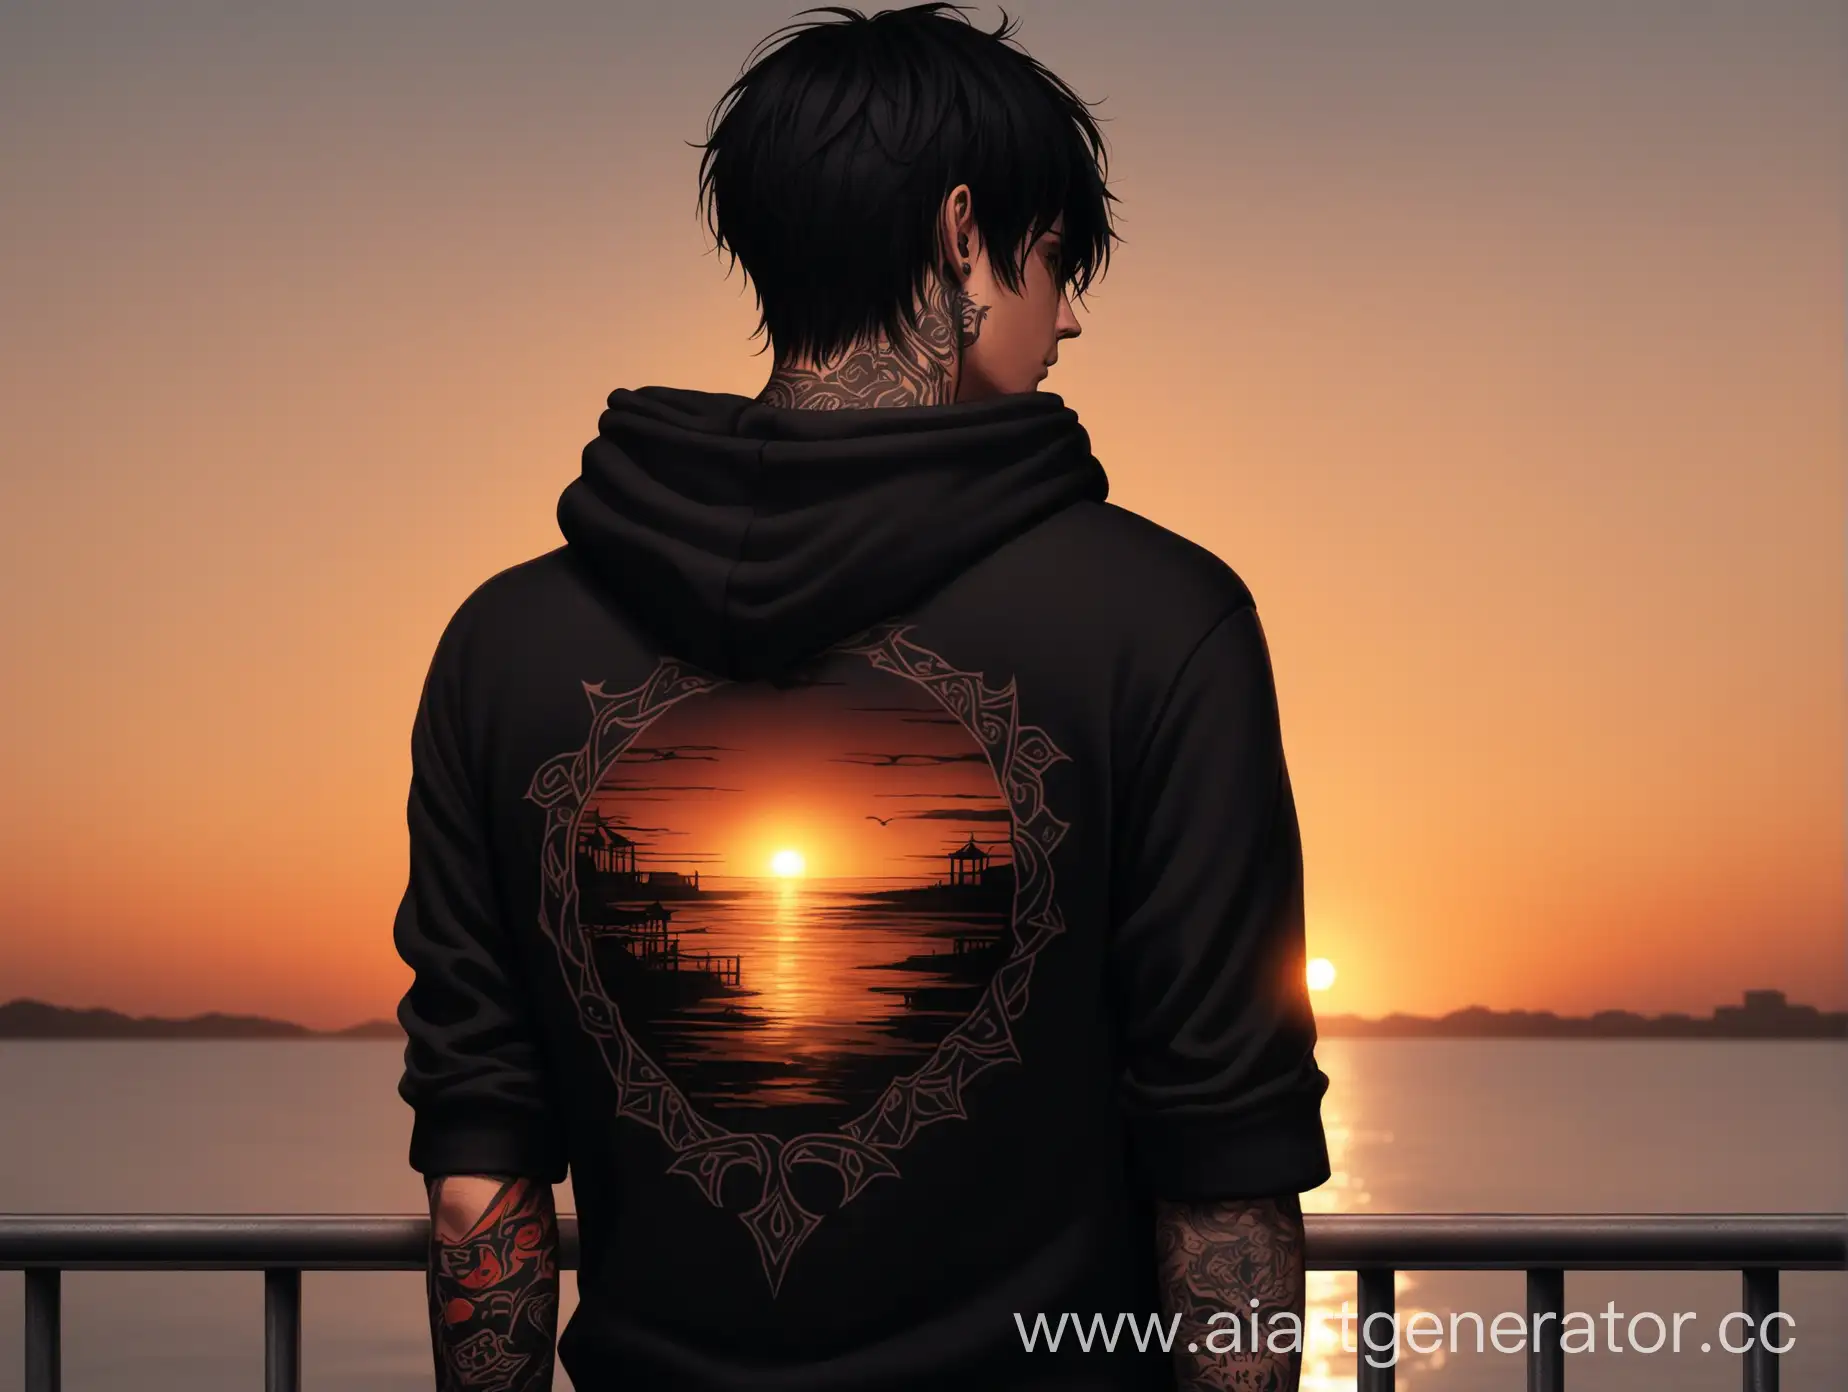 Man-in-Black-Hoodie-Admiring-Sunset-with-Tattooed-Arm